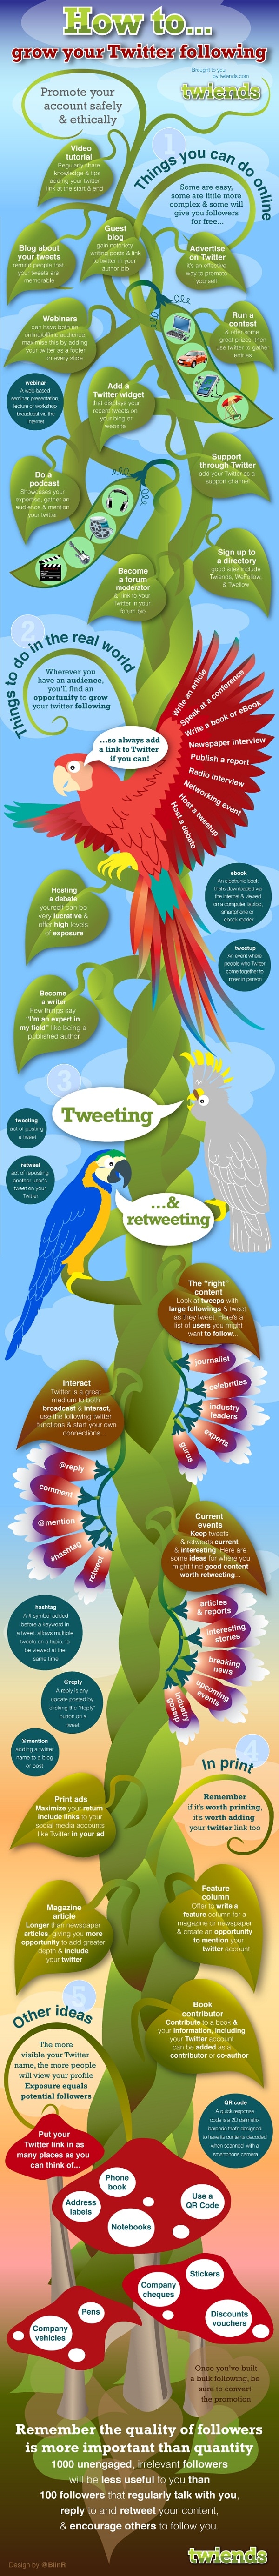 Grow your Twitter following infographic